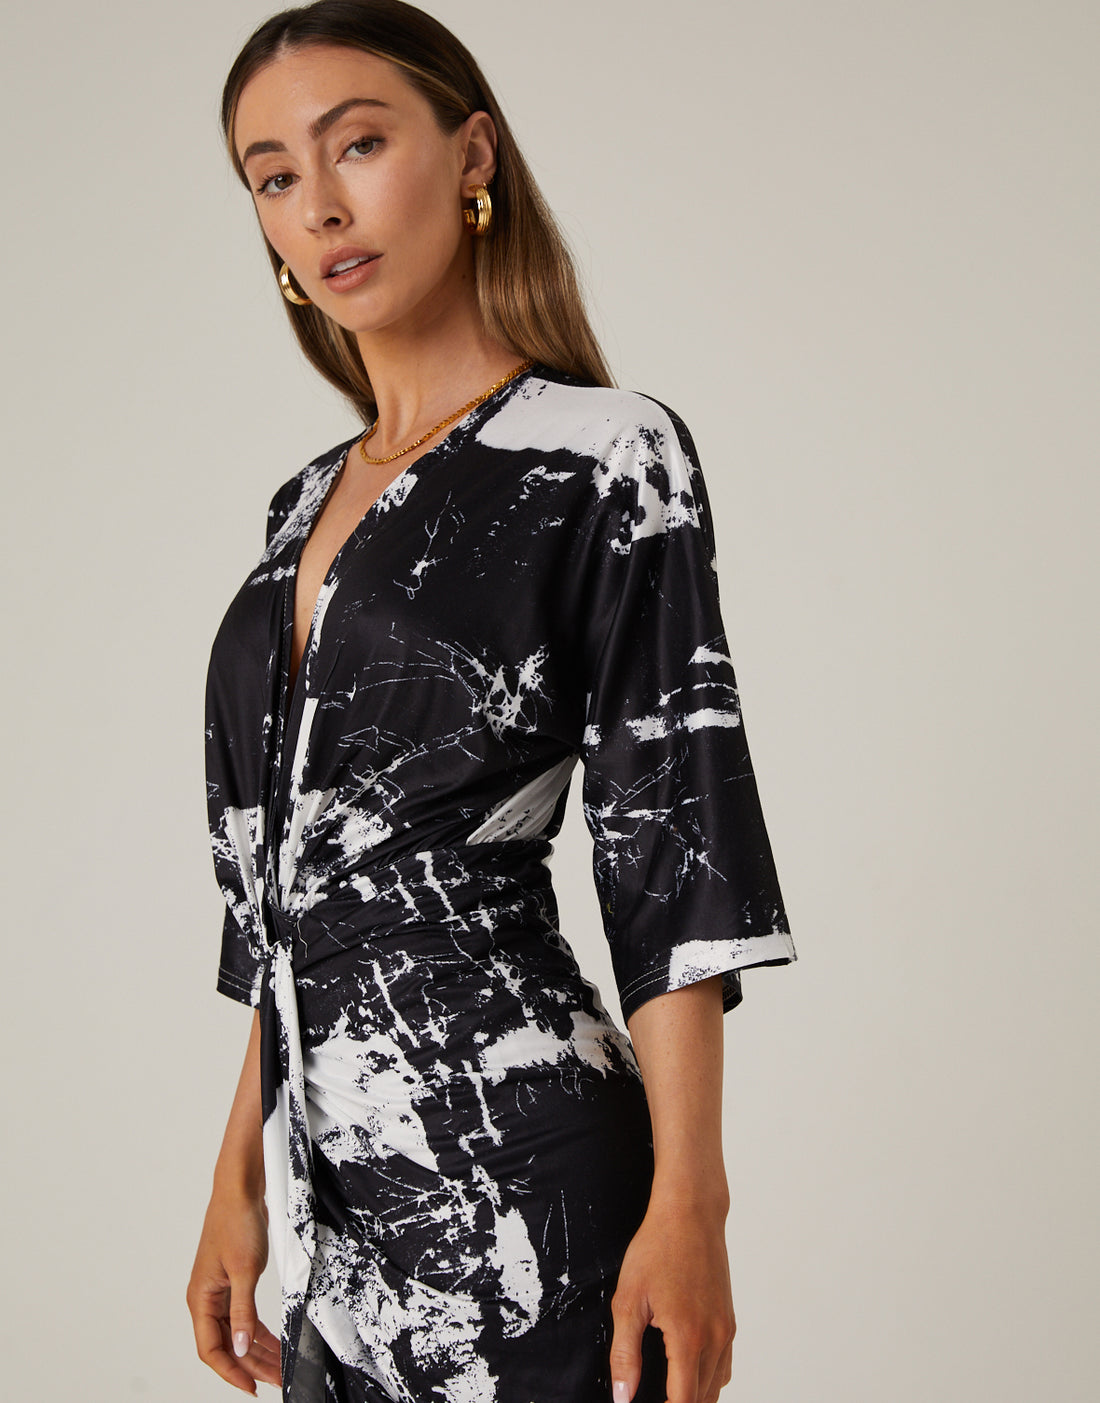 Marble Print Ruched Dress Dresses Black Small -2020AVE